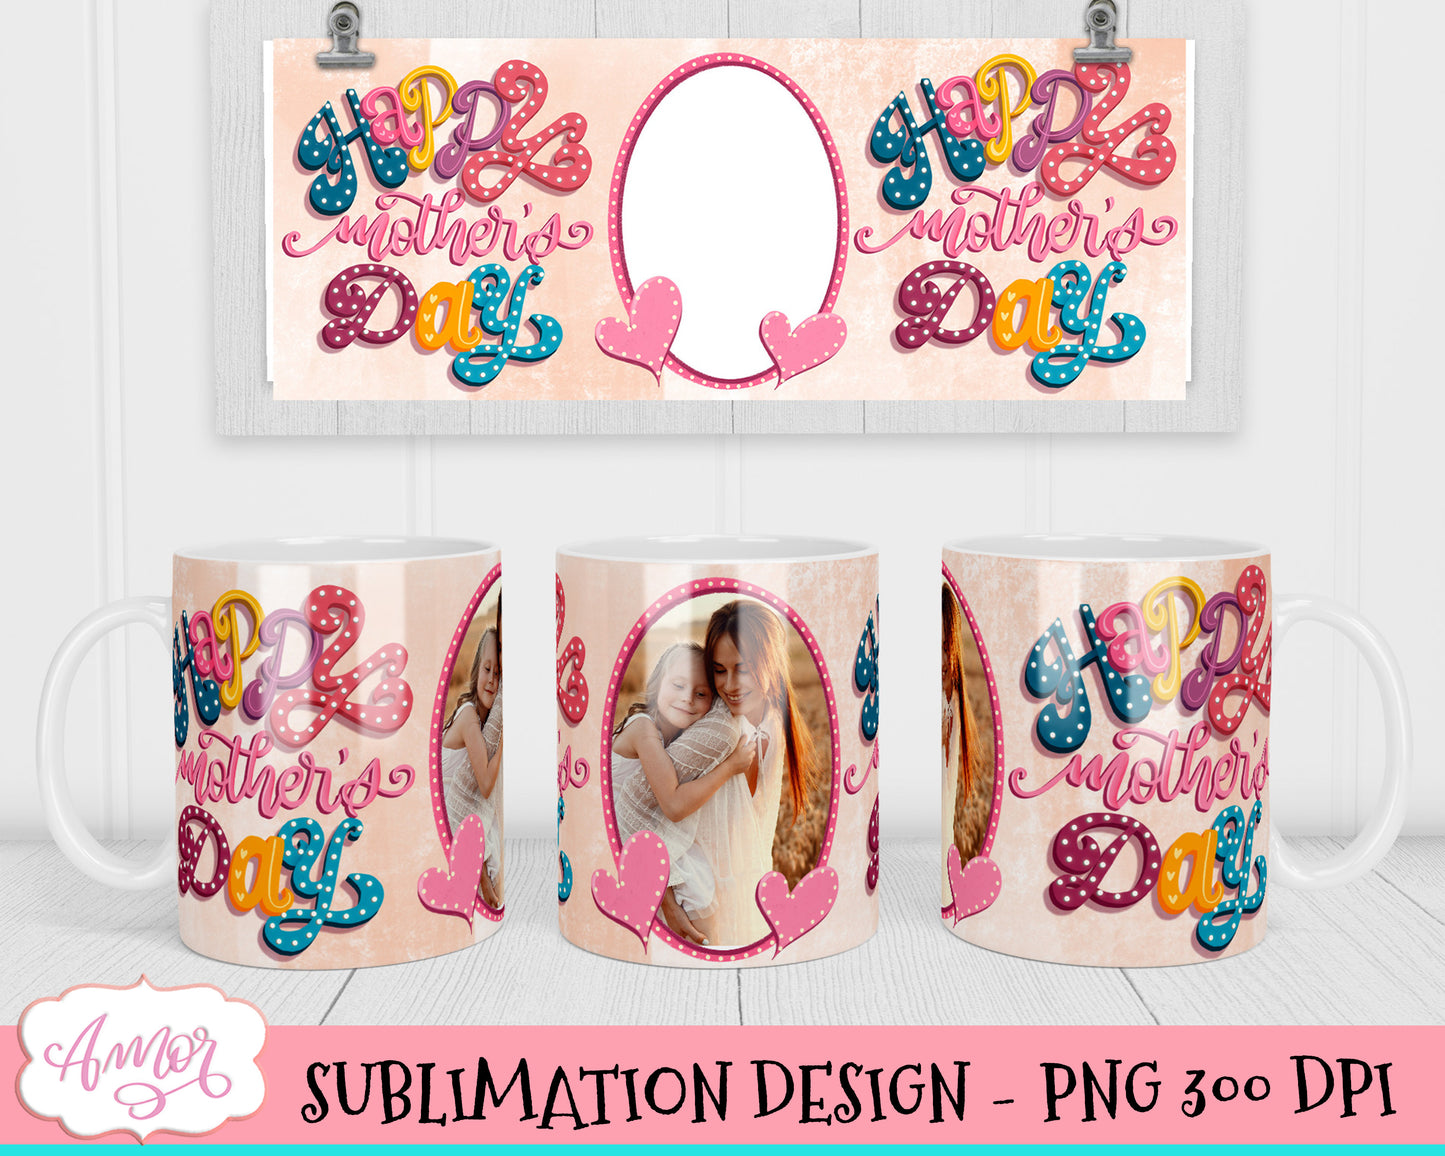 Mother's day photo mug wrap for sublimation